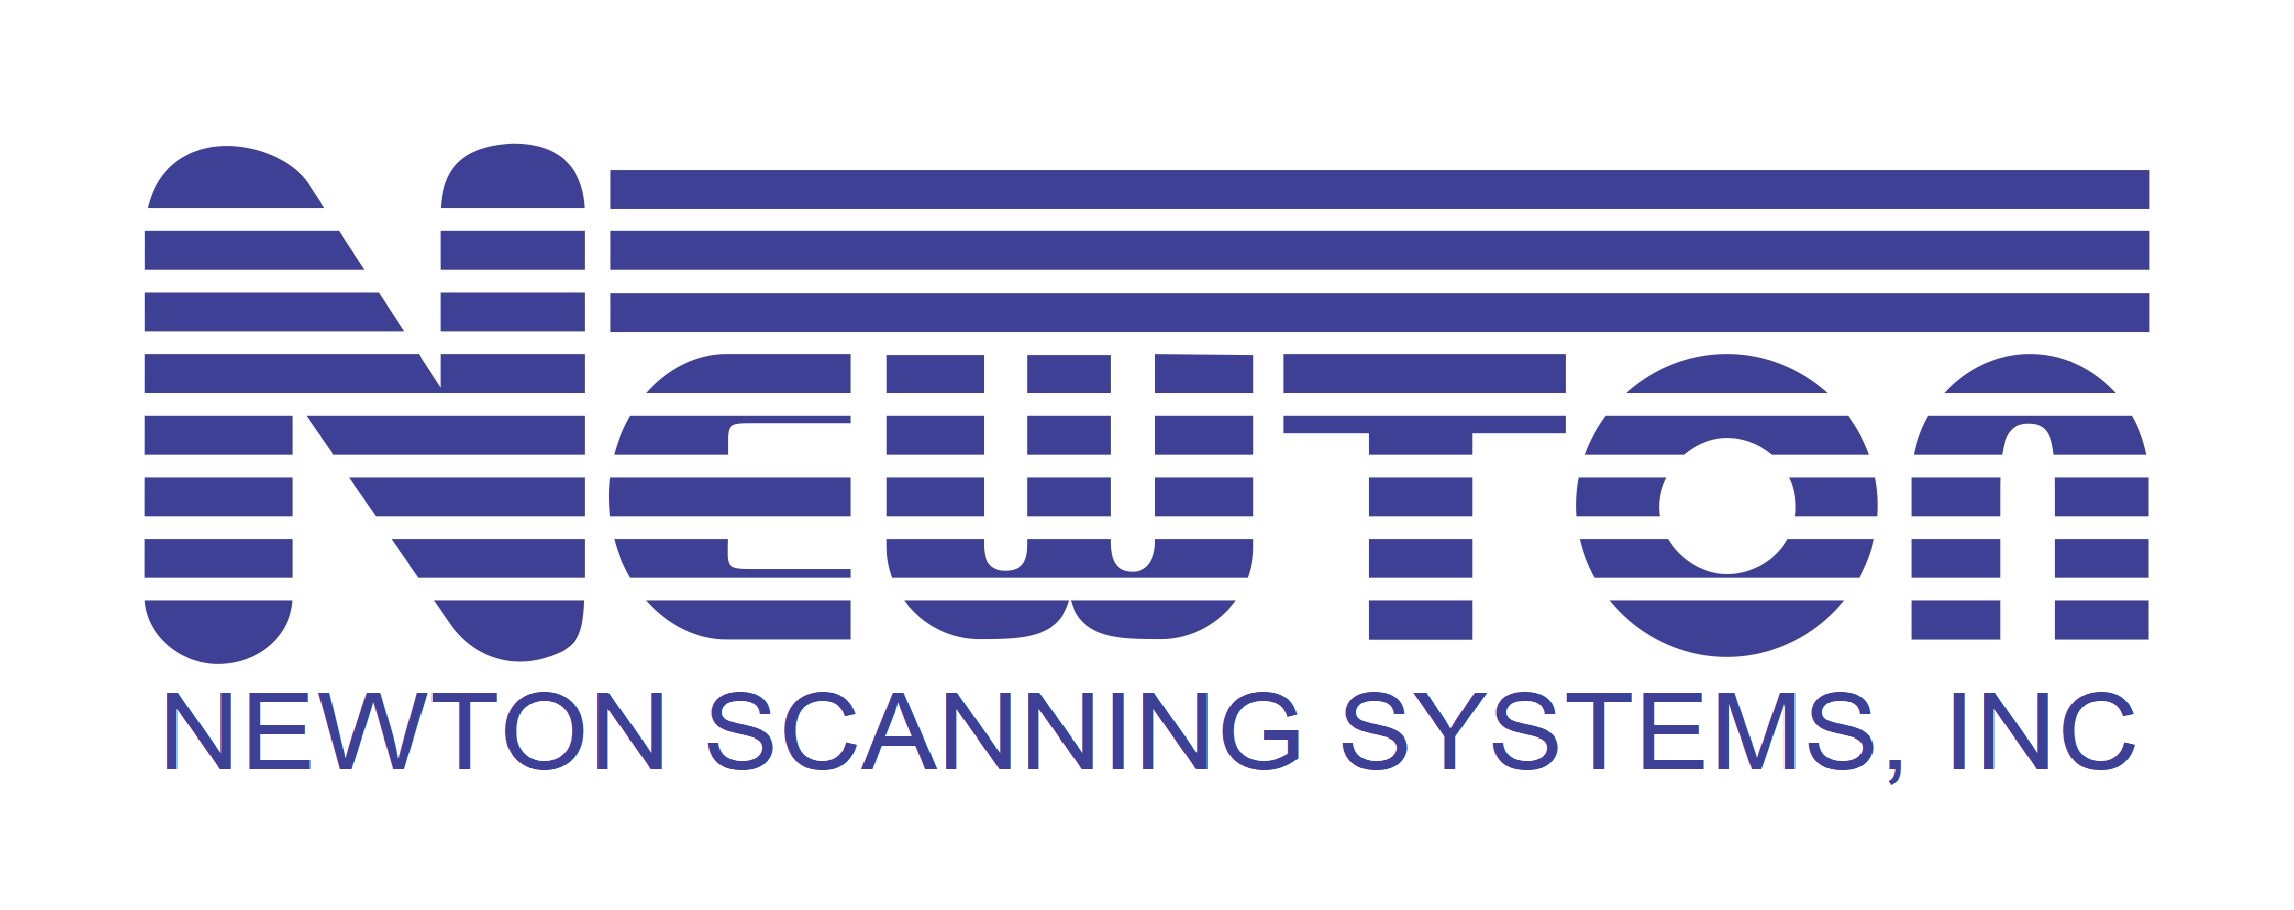 Newton Scanning Systems Incorporated